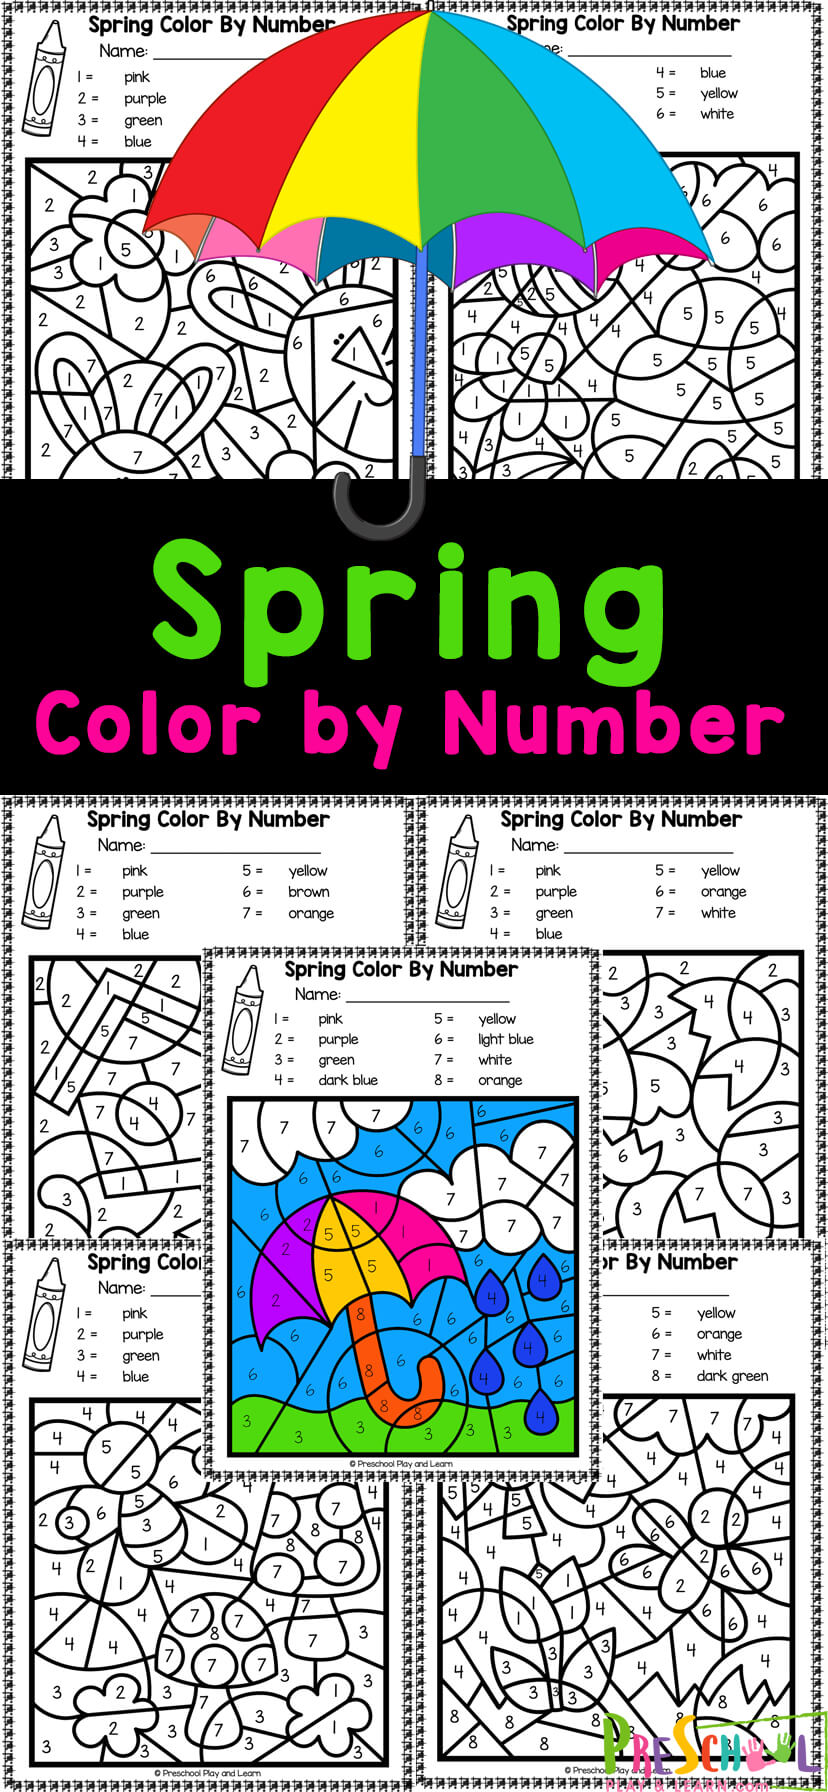 Make working on number recognition fun with these spring color by number pages. These spring color by number printables are filled with color by code images of springtime. As pre-k, kindergarten, and first graders colour by numbers in these free spring worksheet for preschool they will be strengthening their hand muscles while having fun with a spring learning activity!